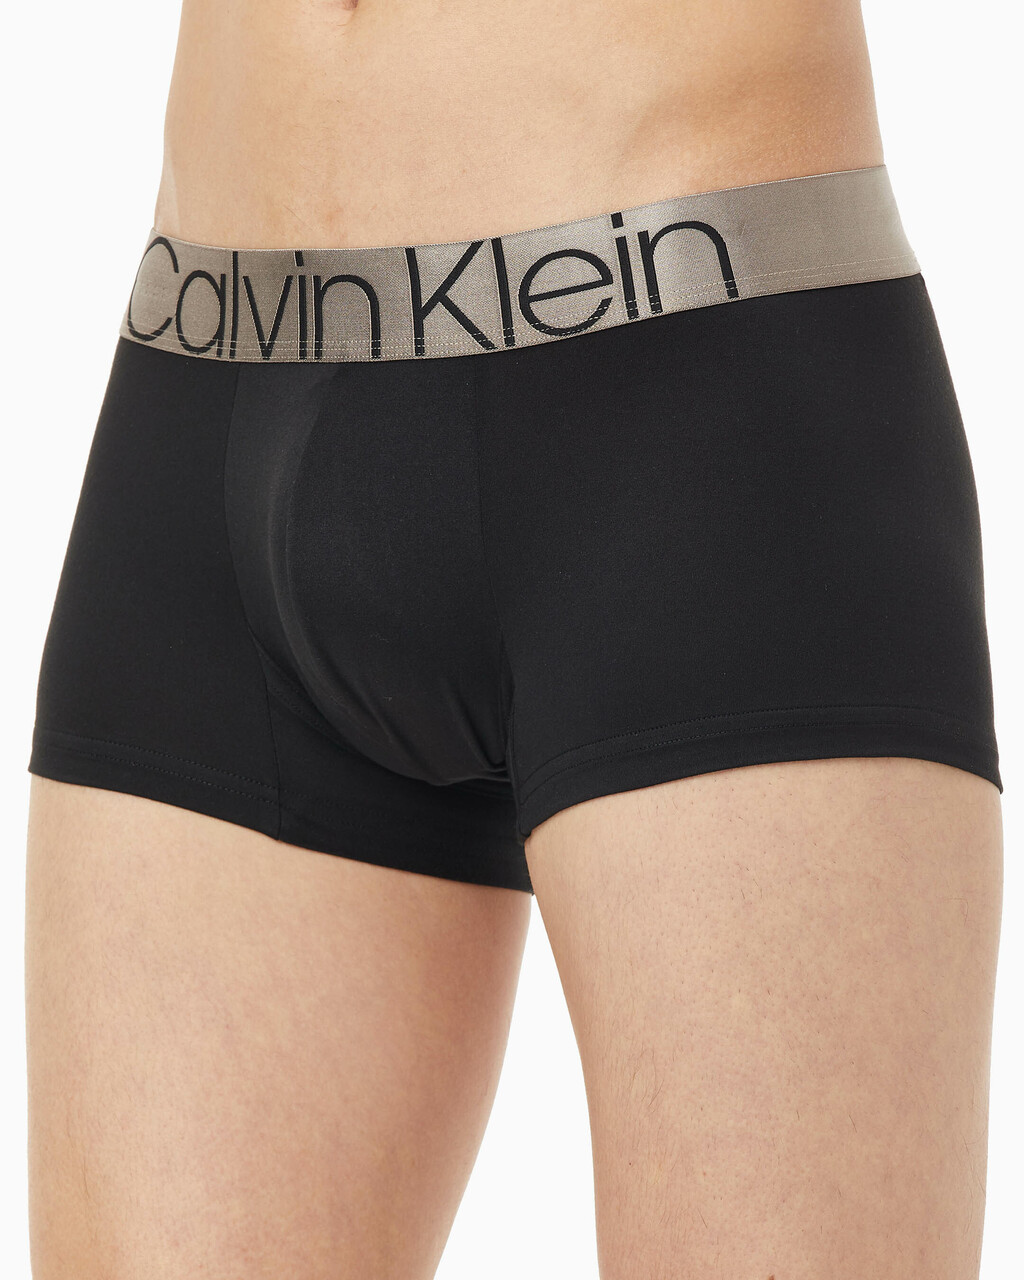 ICON MICRO LOW RISE TRUNKS, Black, hi-res